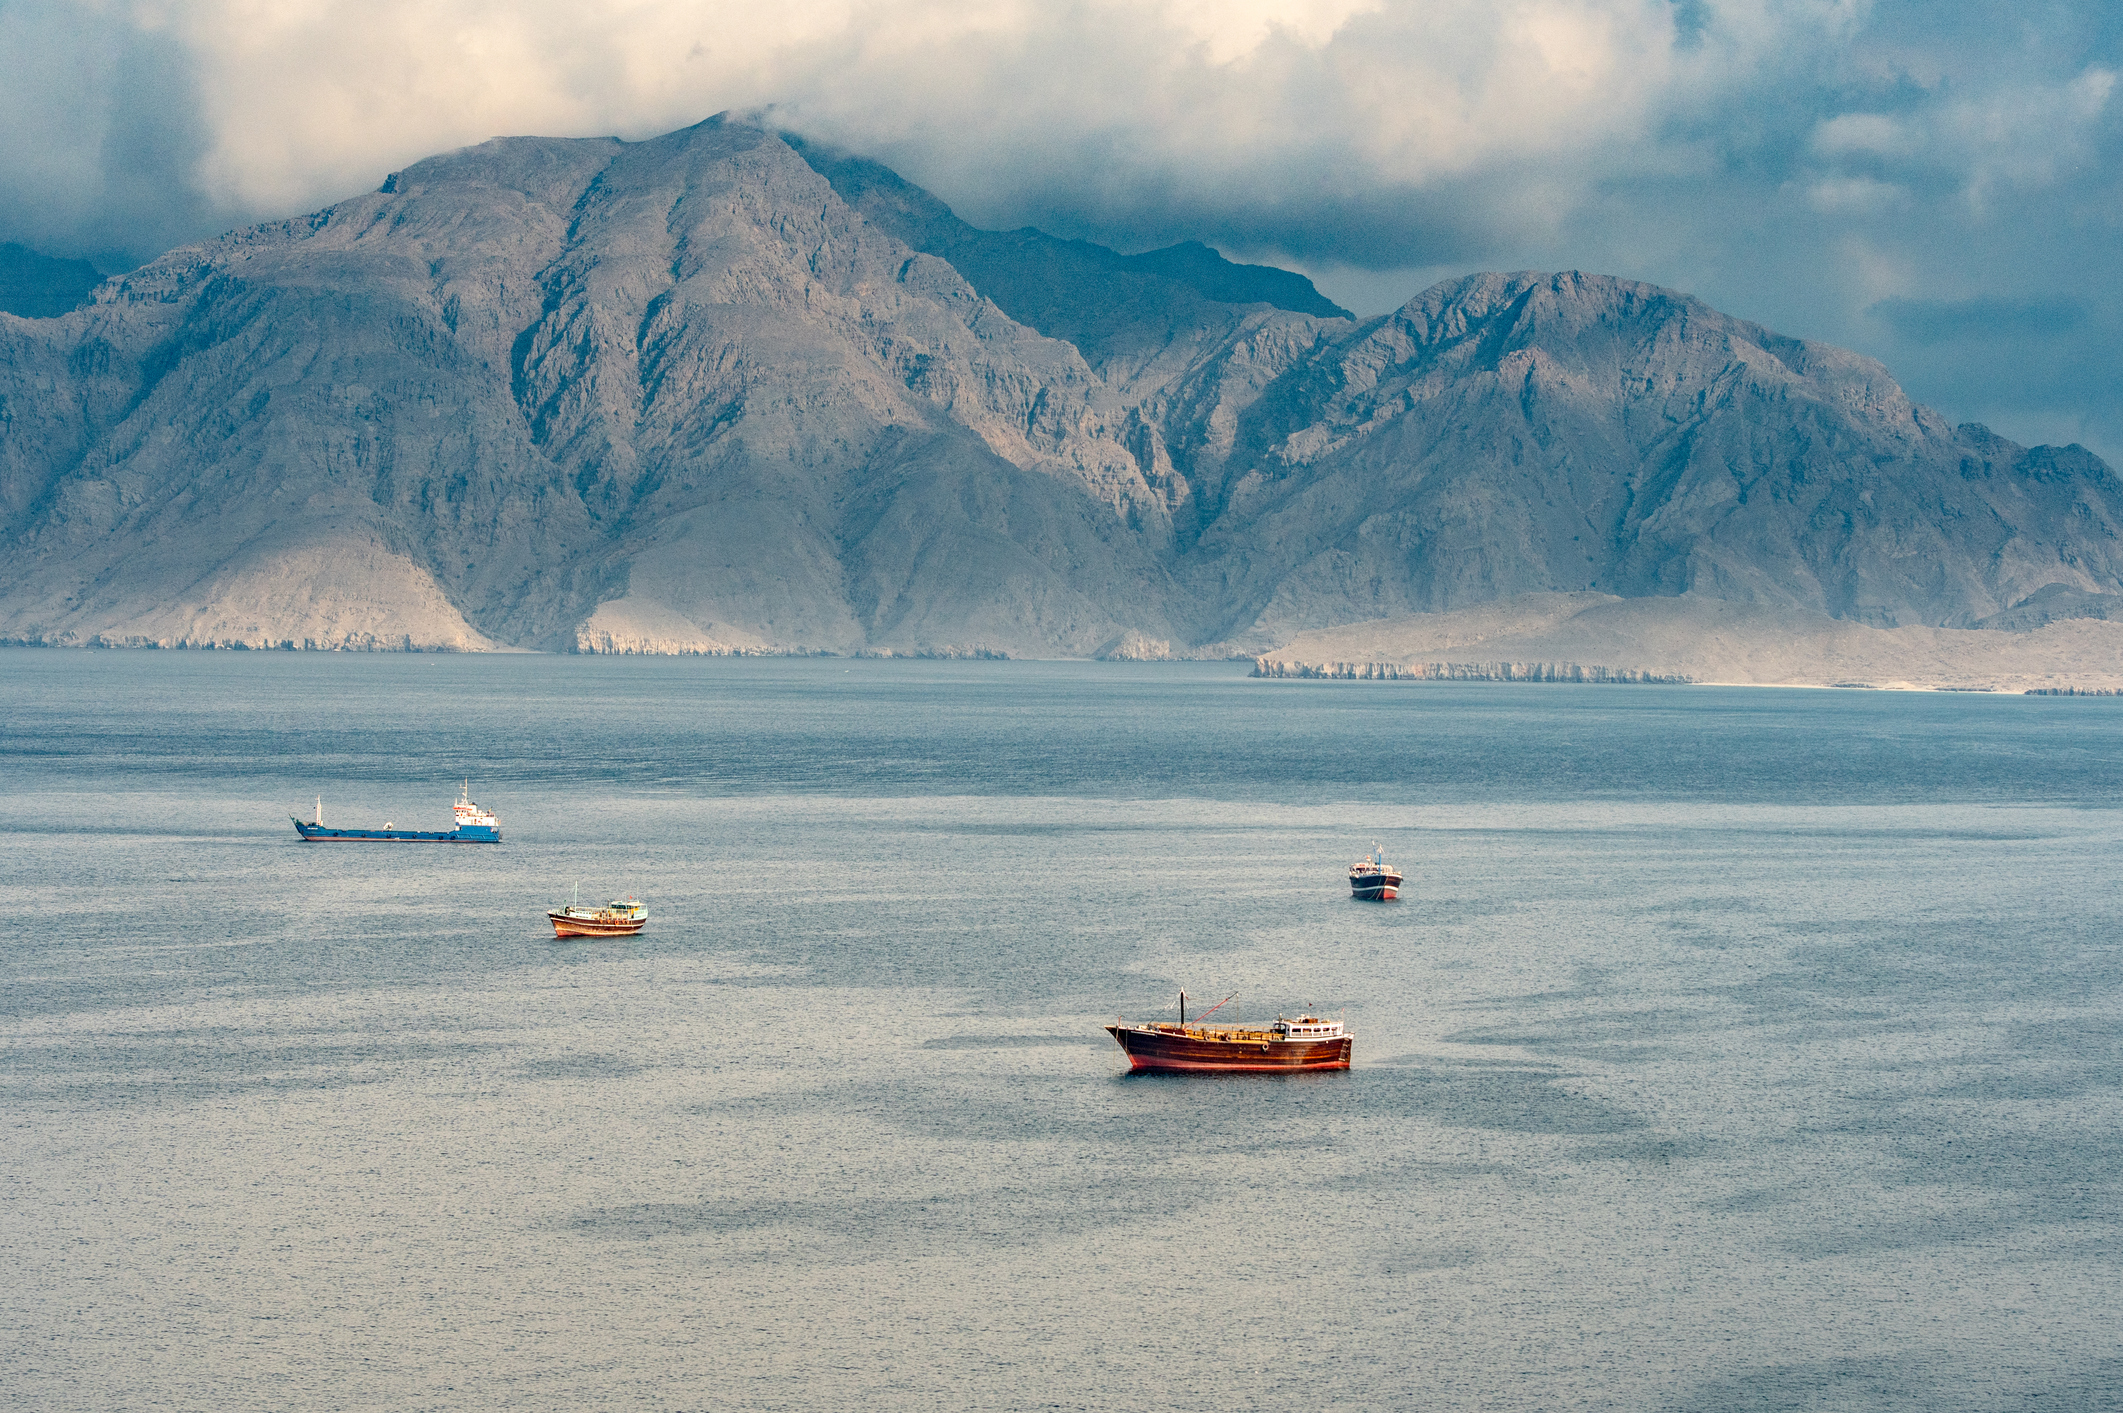 Boats on calm water with mountains in the background under overcast skies